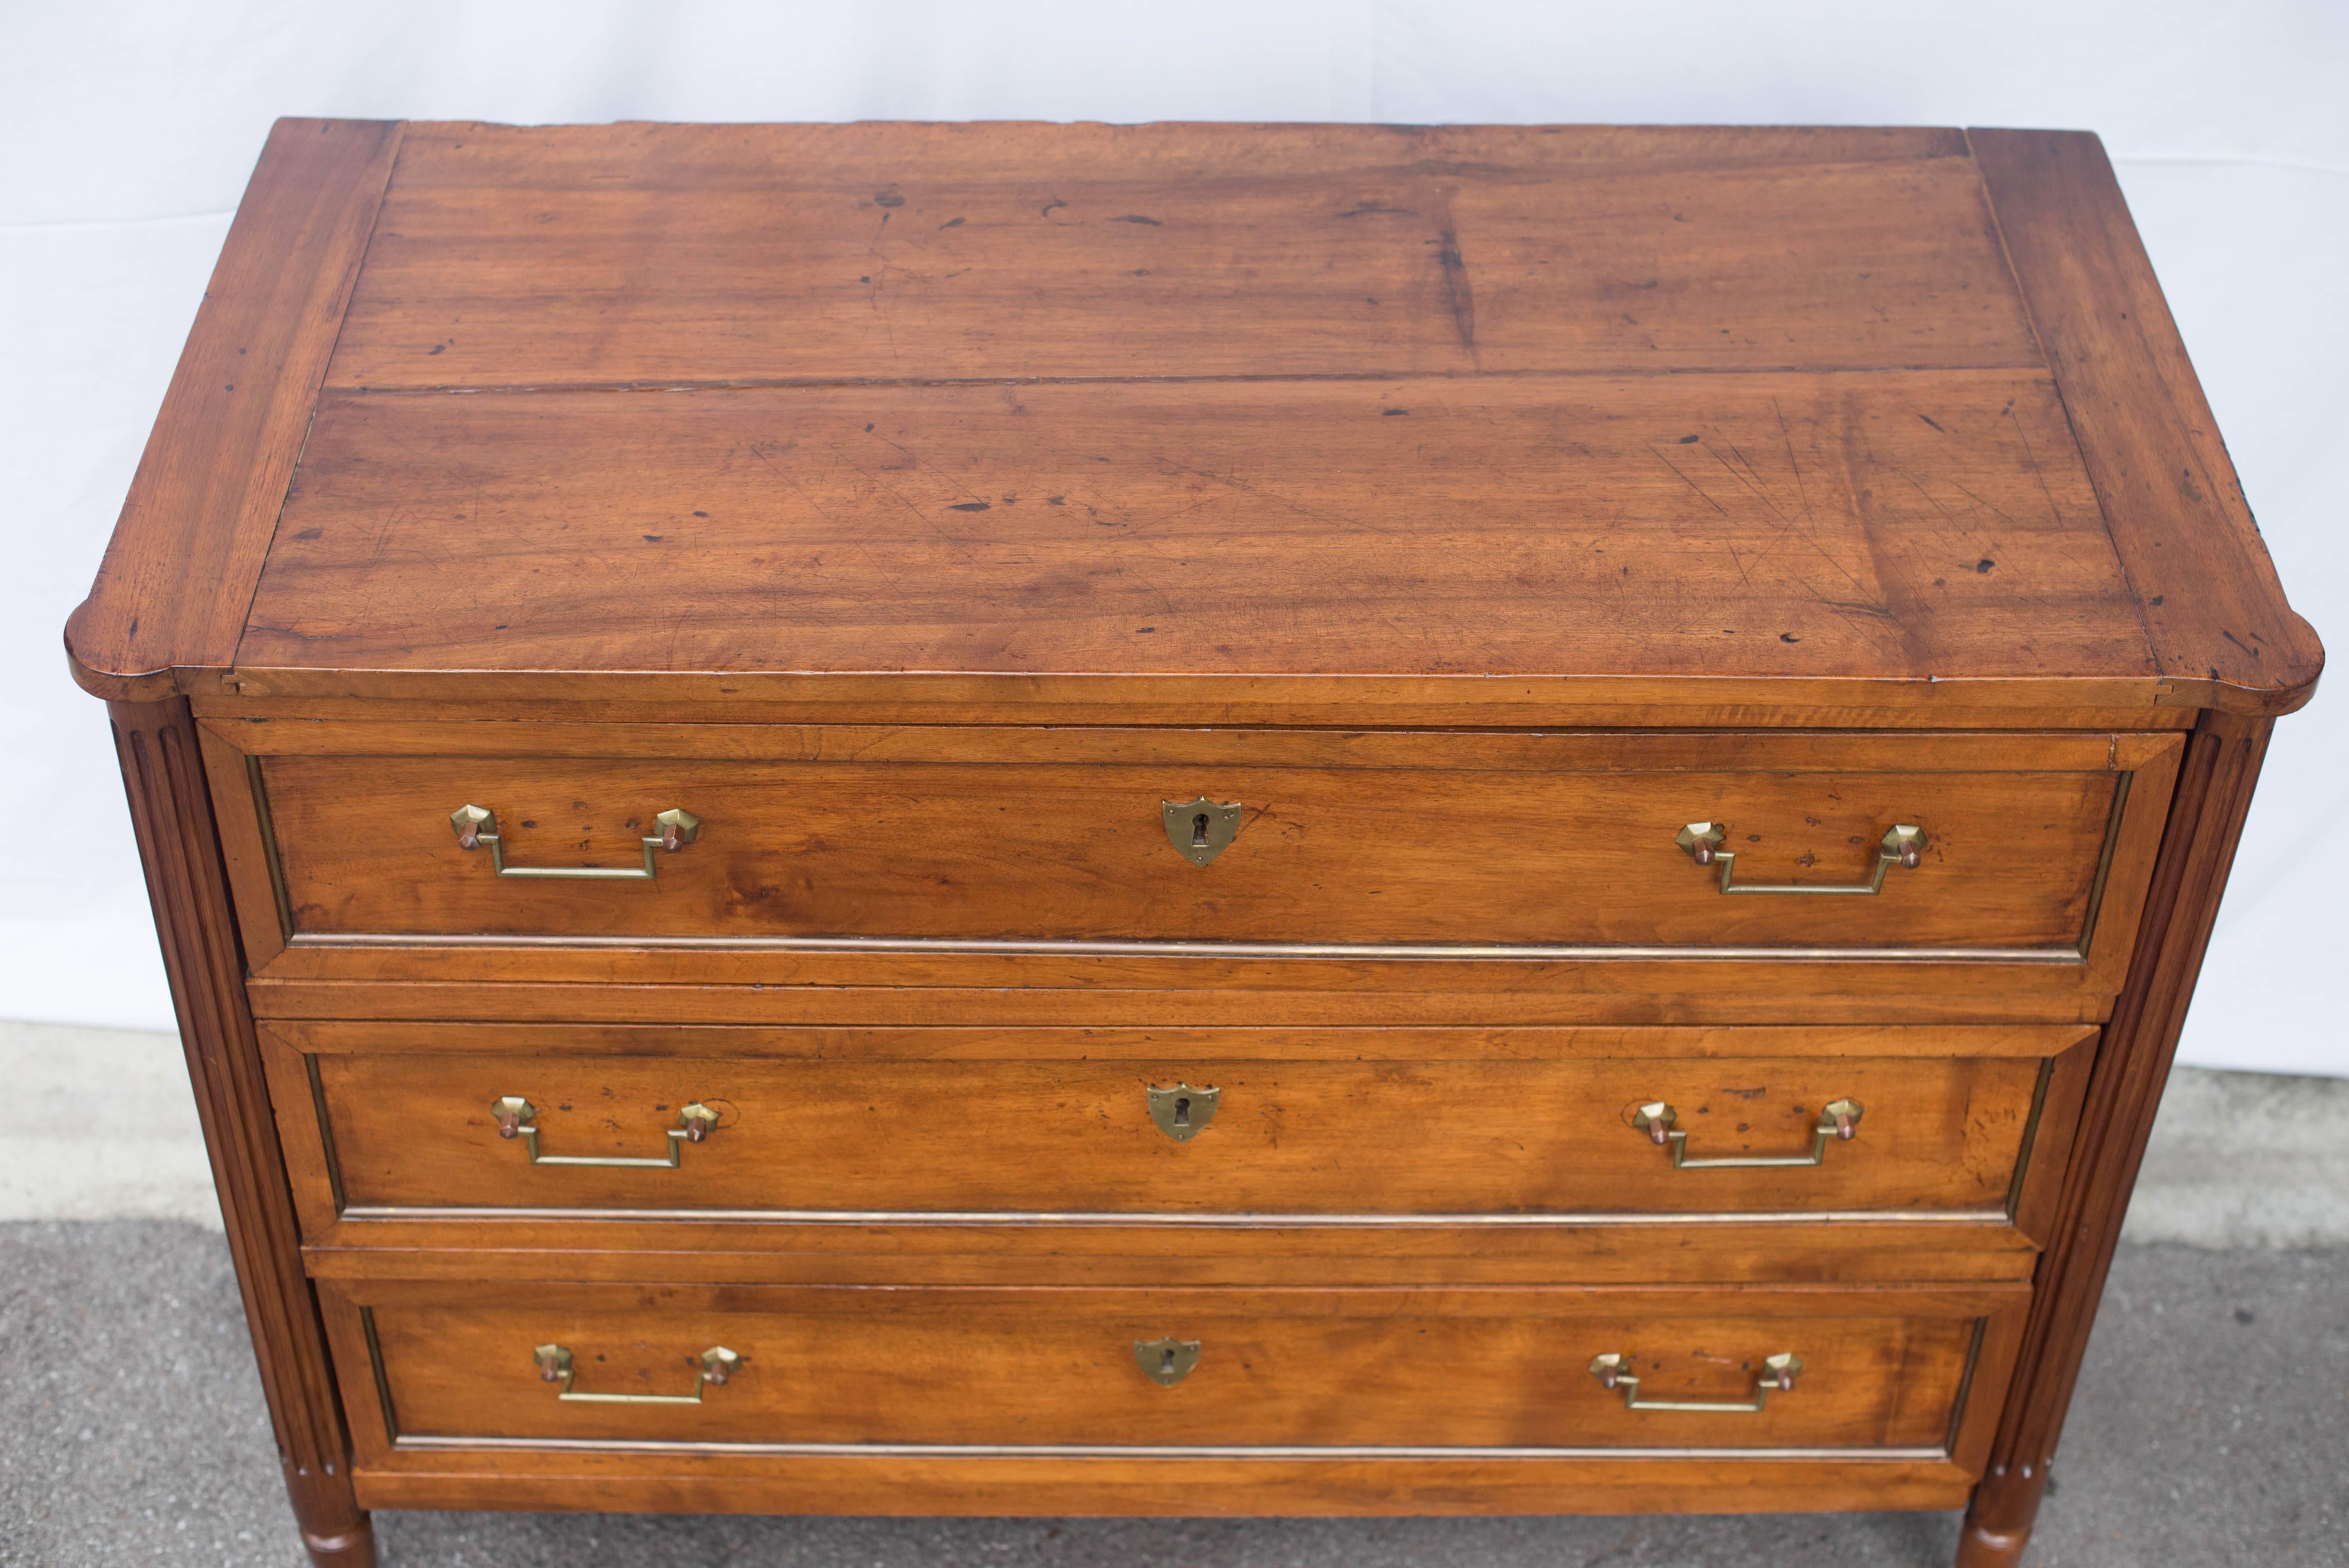 This 19th century French walnut commode or chest of drawers features three drawers with Classic brass key escutcheons and drop handles. The legs are fluted and the sides paneled.